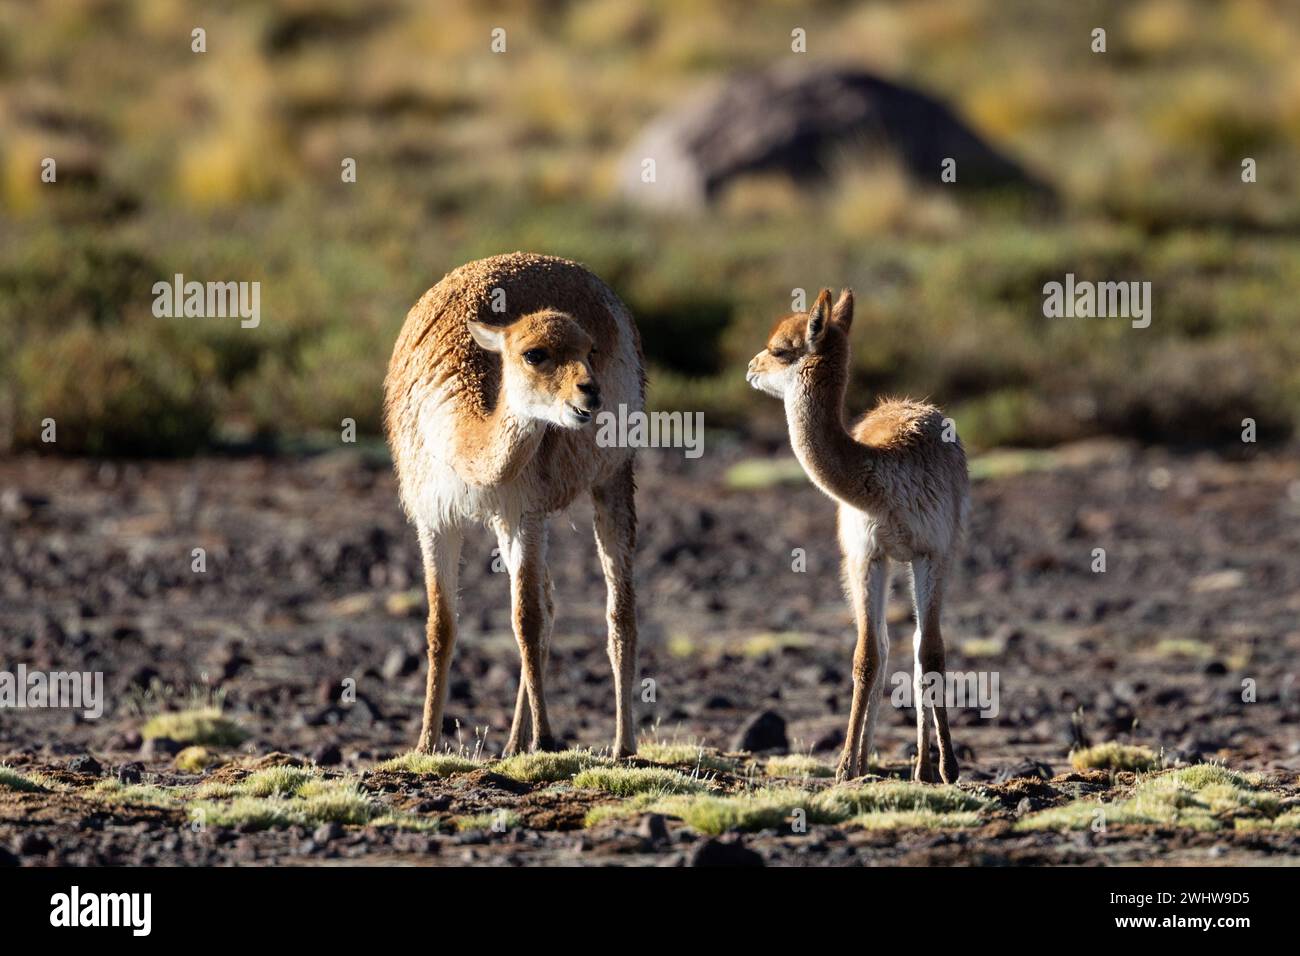 A young vicuna stands grazing with its mother in the Chilean steppe landscape of the Atacama Desert. Stock Photo